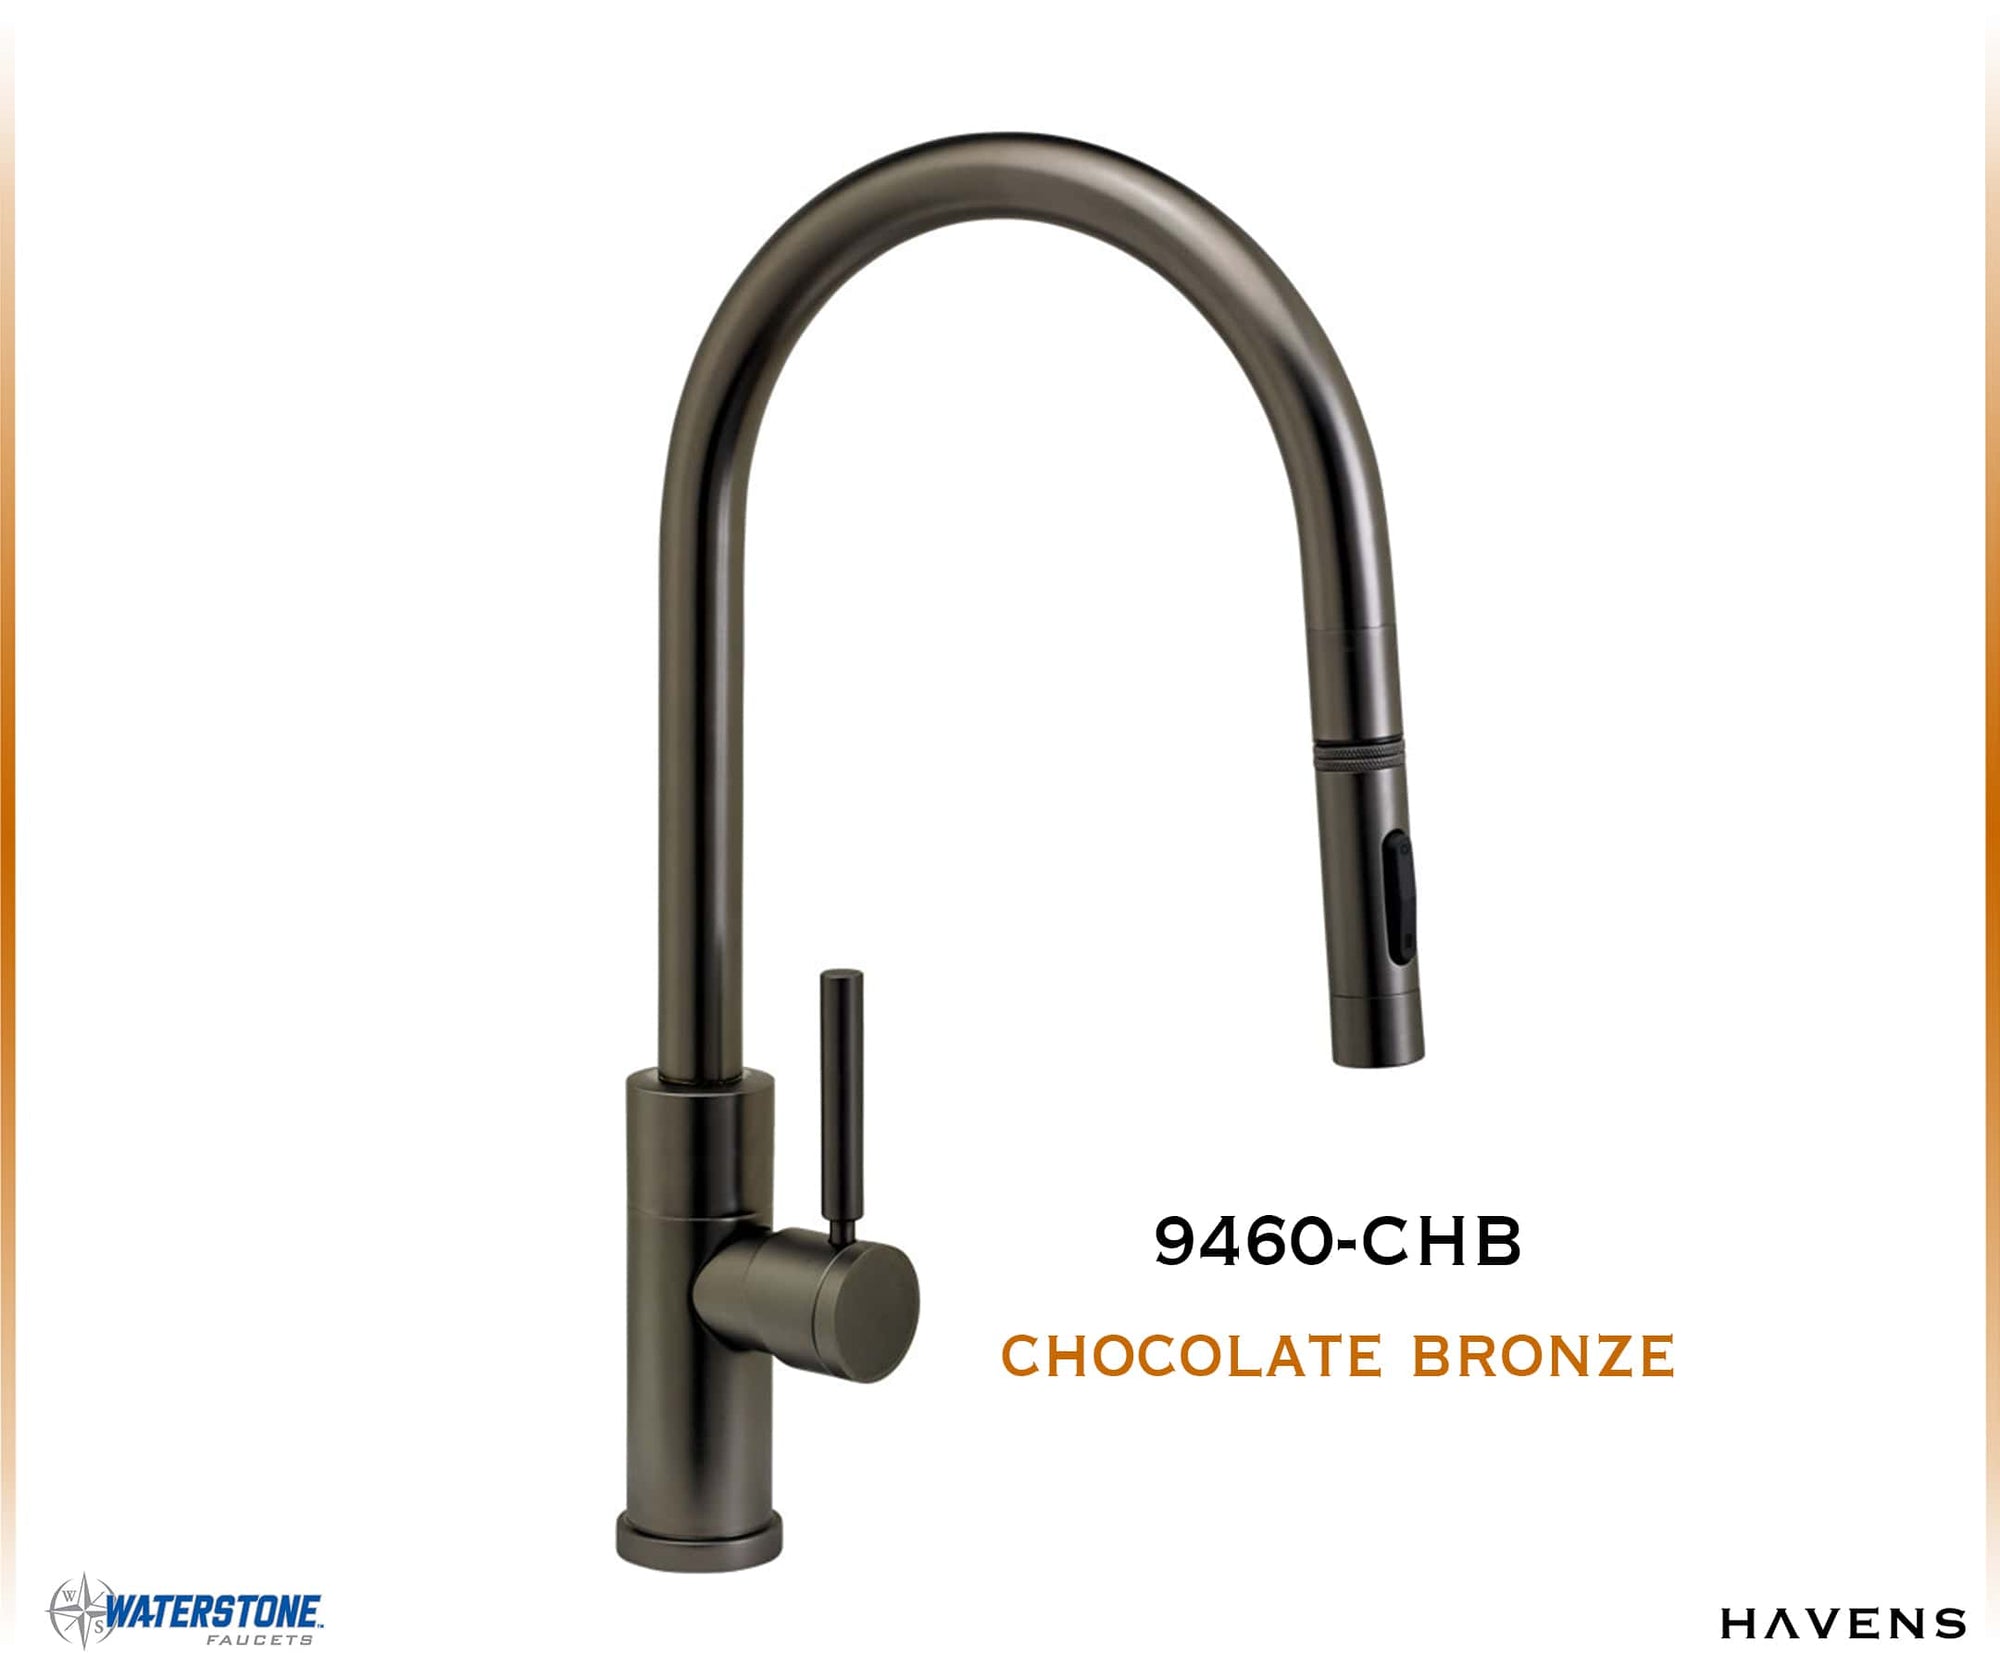 Waterstone Modern PLP Angled Pulldown Faucet - 9460